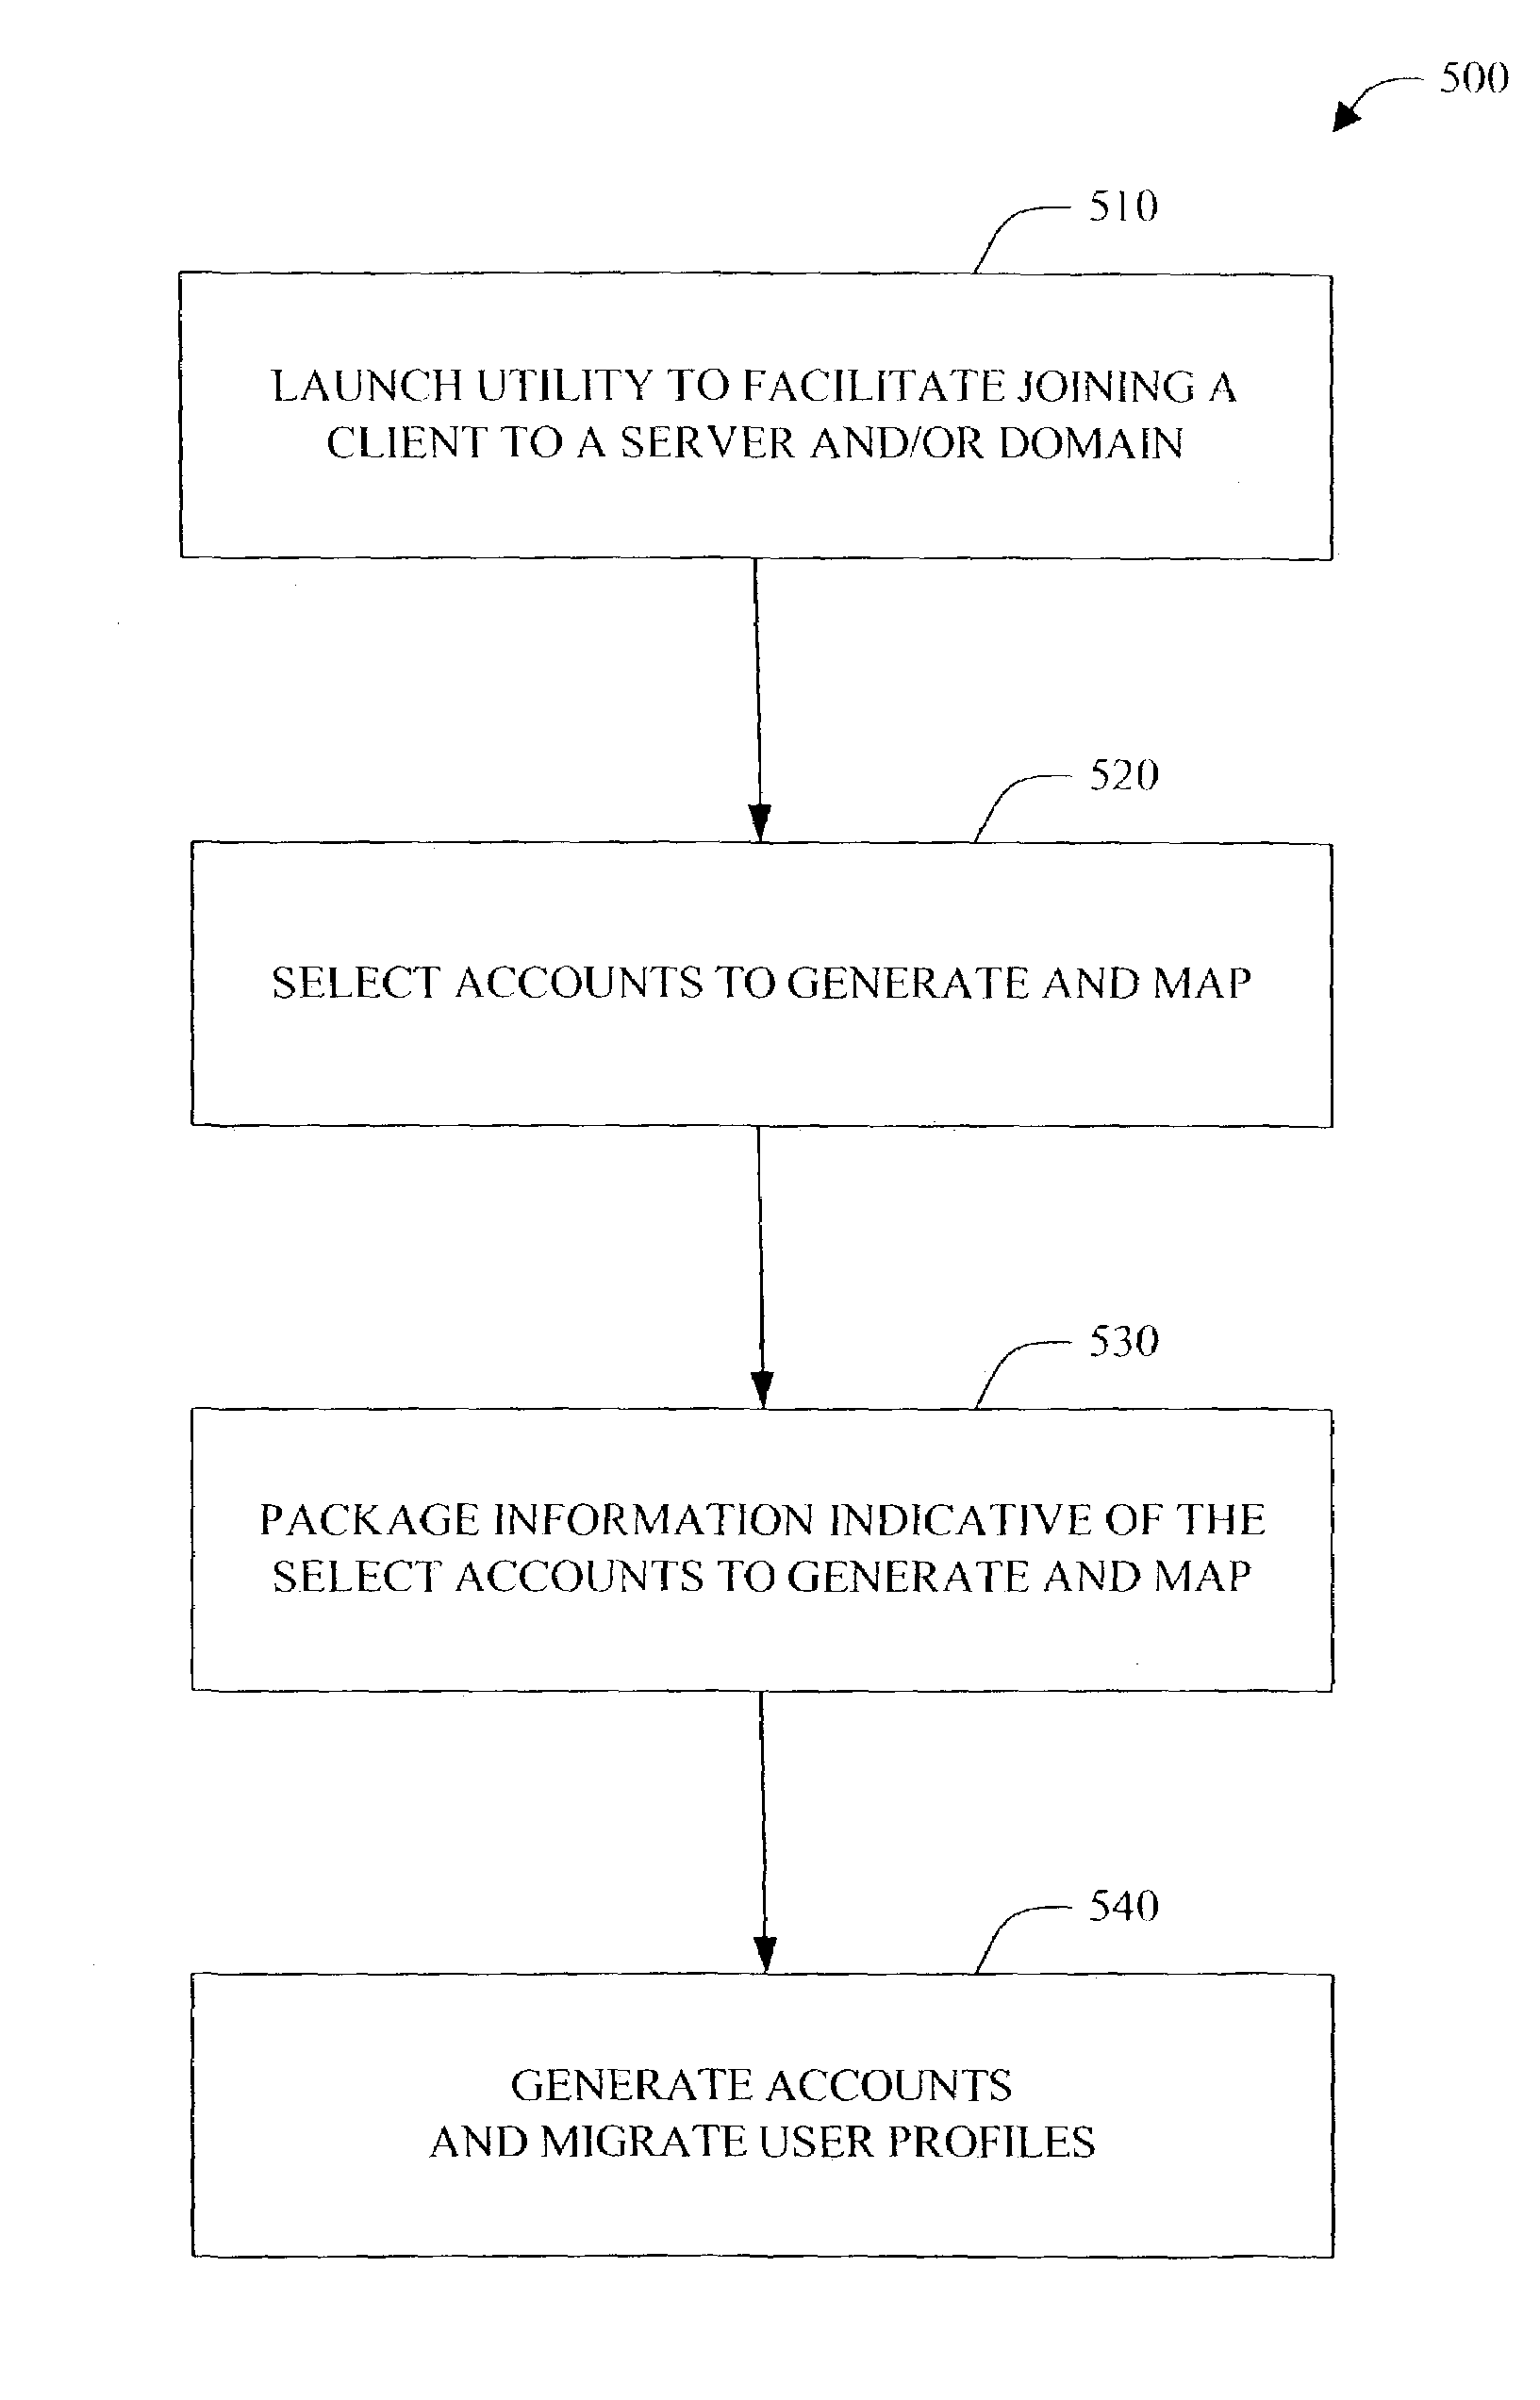 Systems and methods to migrate a user profile when joining a client to a server and/or domain